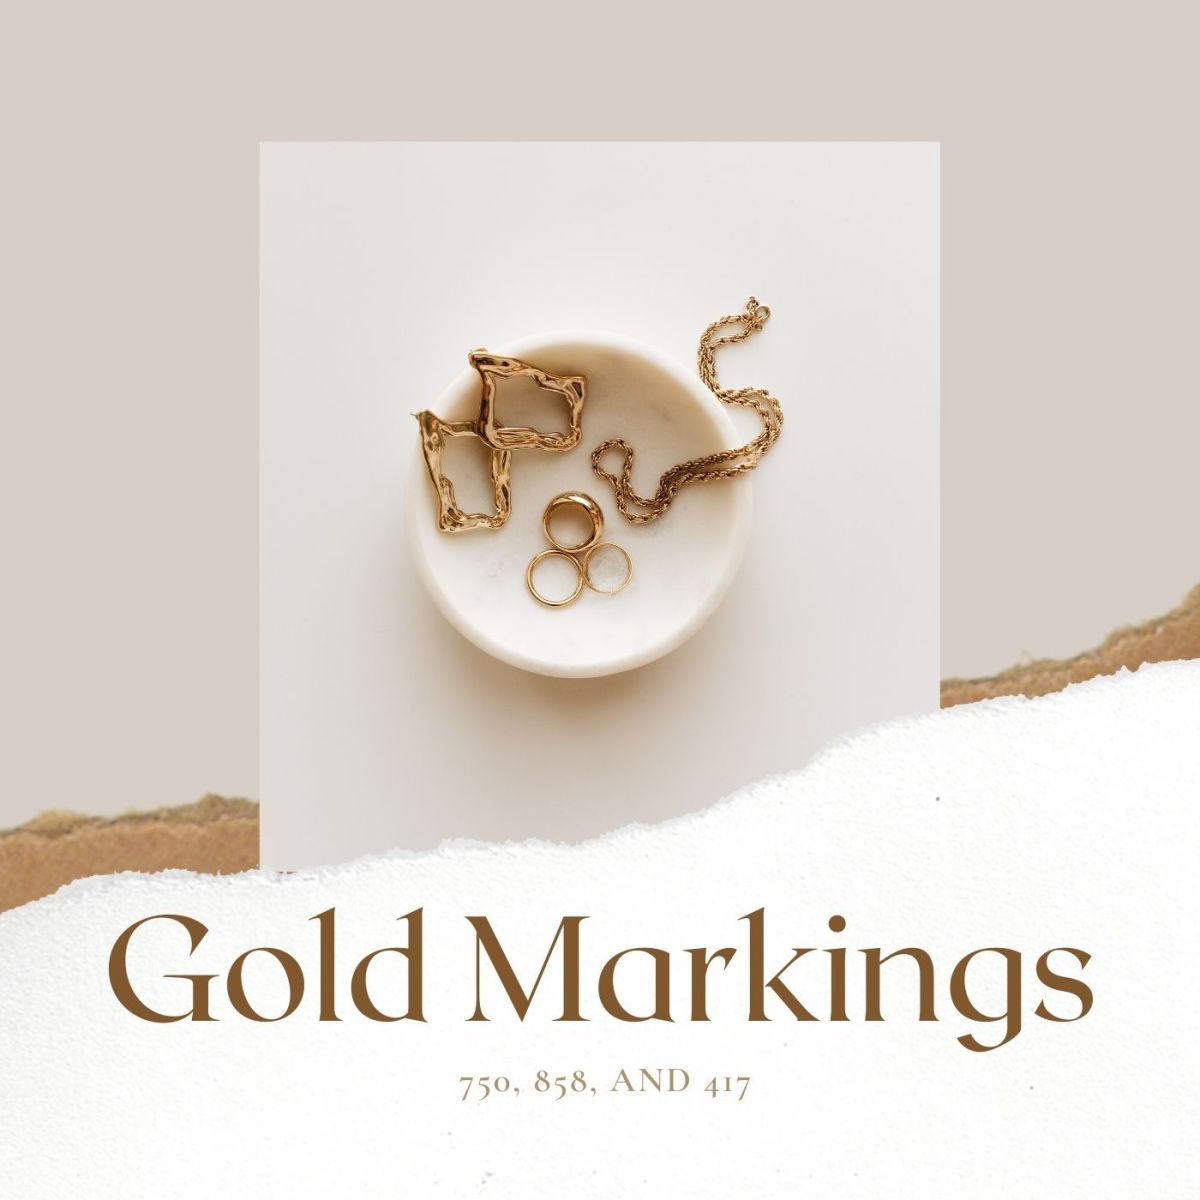 750, 585, and 417 Gold Markings on Jewelry and What They Mean ...